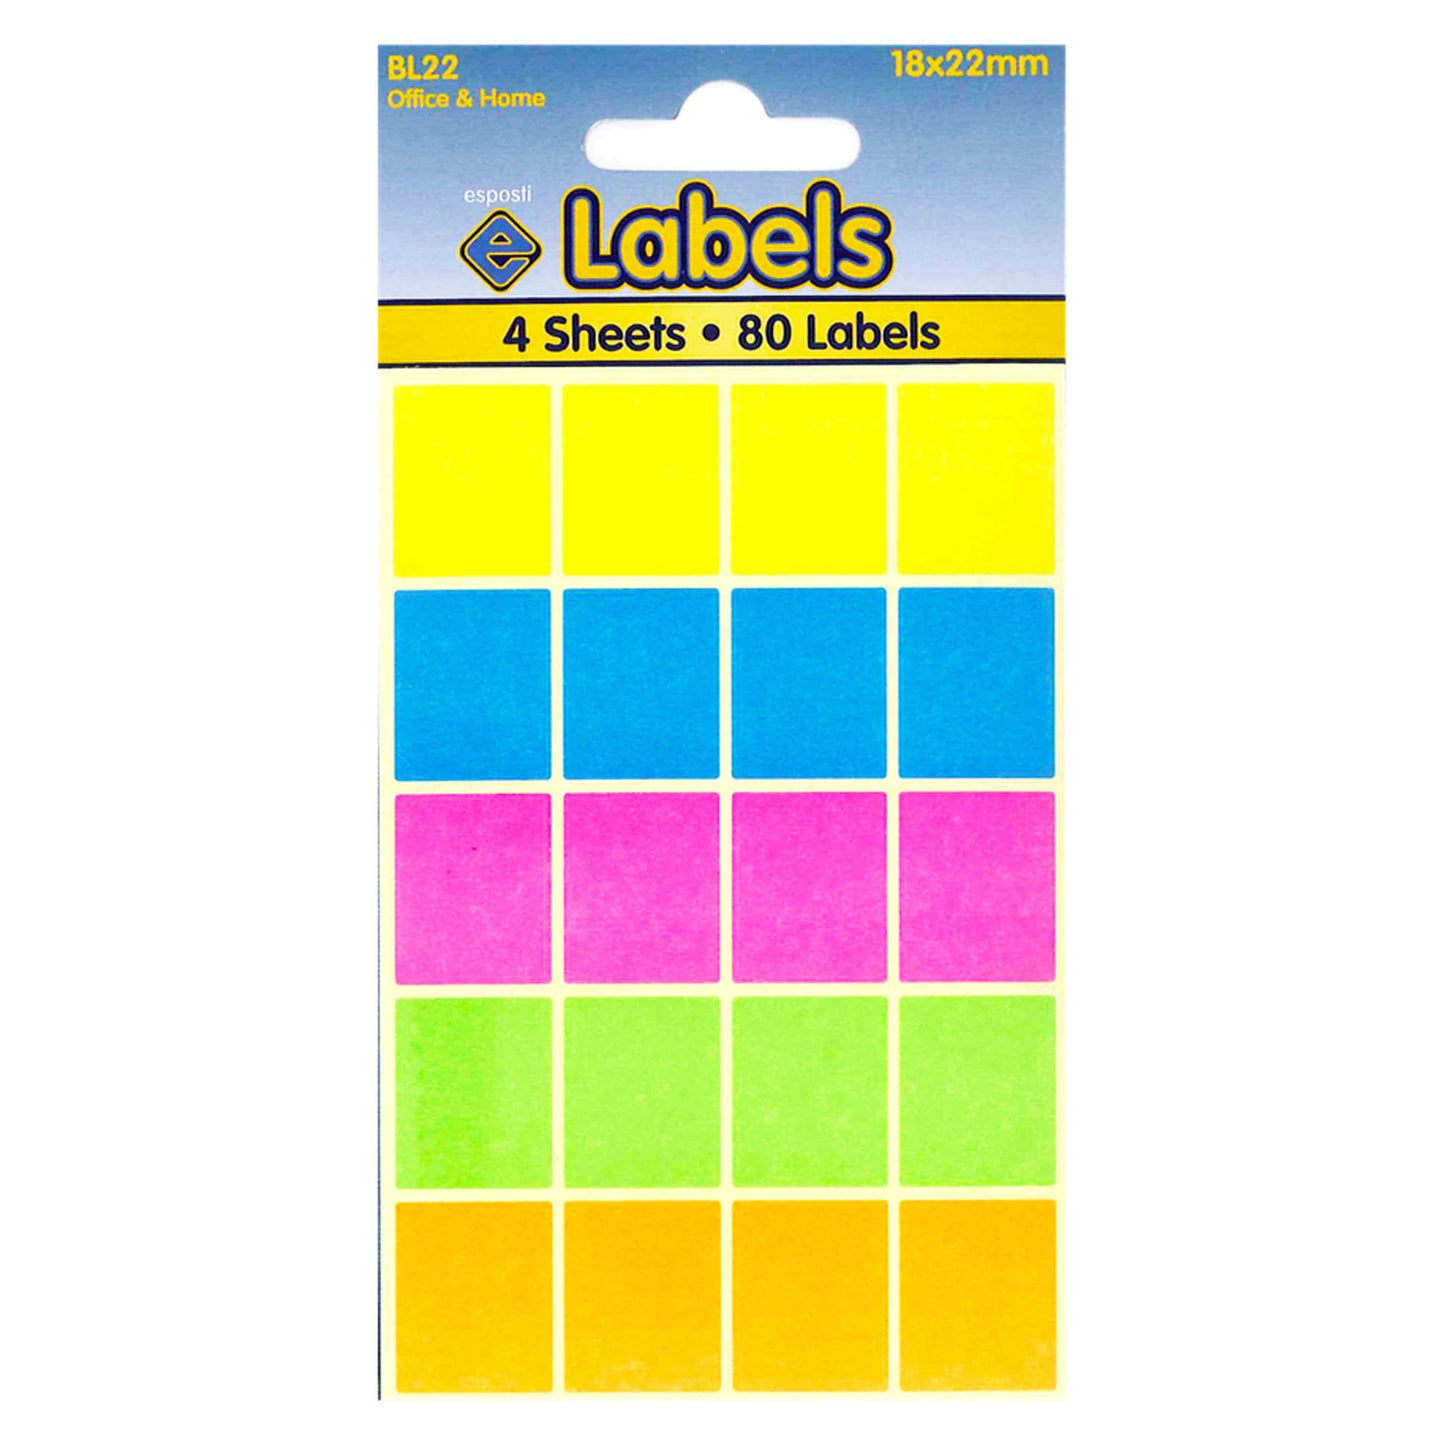 Coloured Labels 18 X 22mm Stickers - BL22